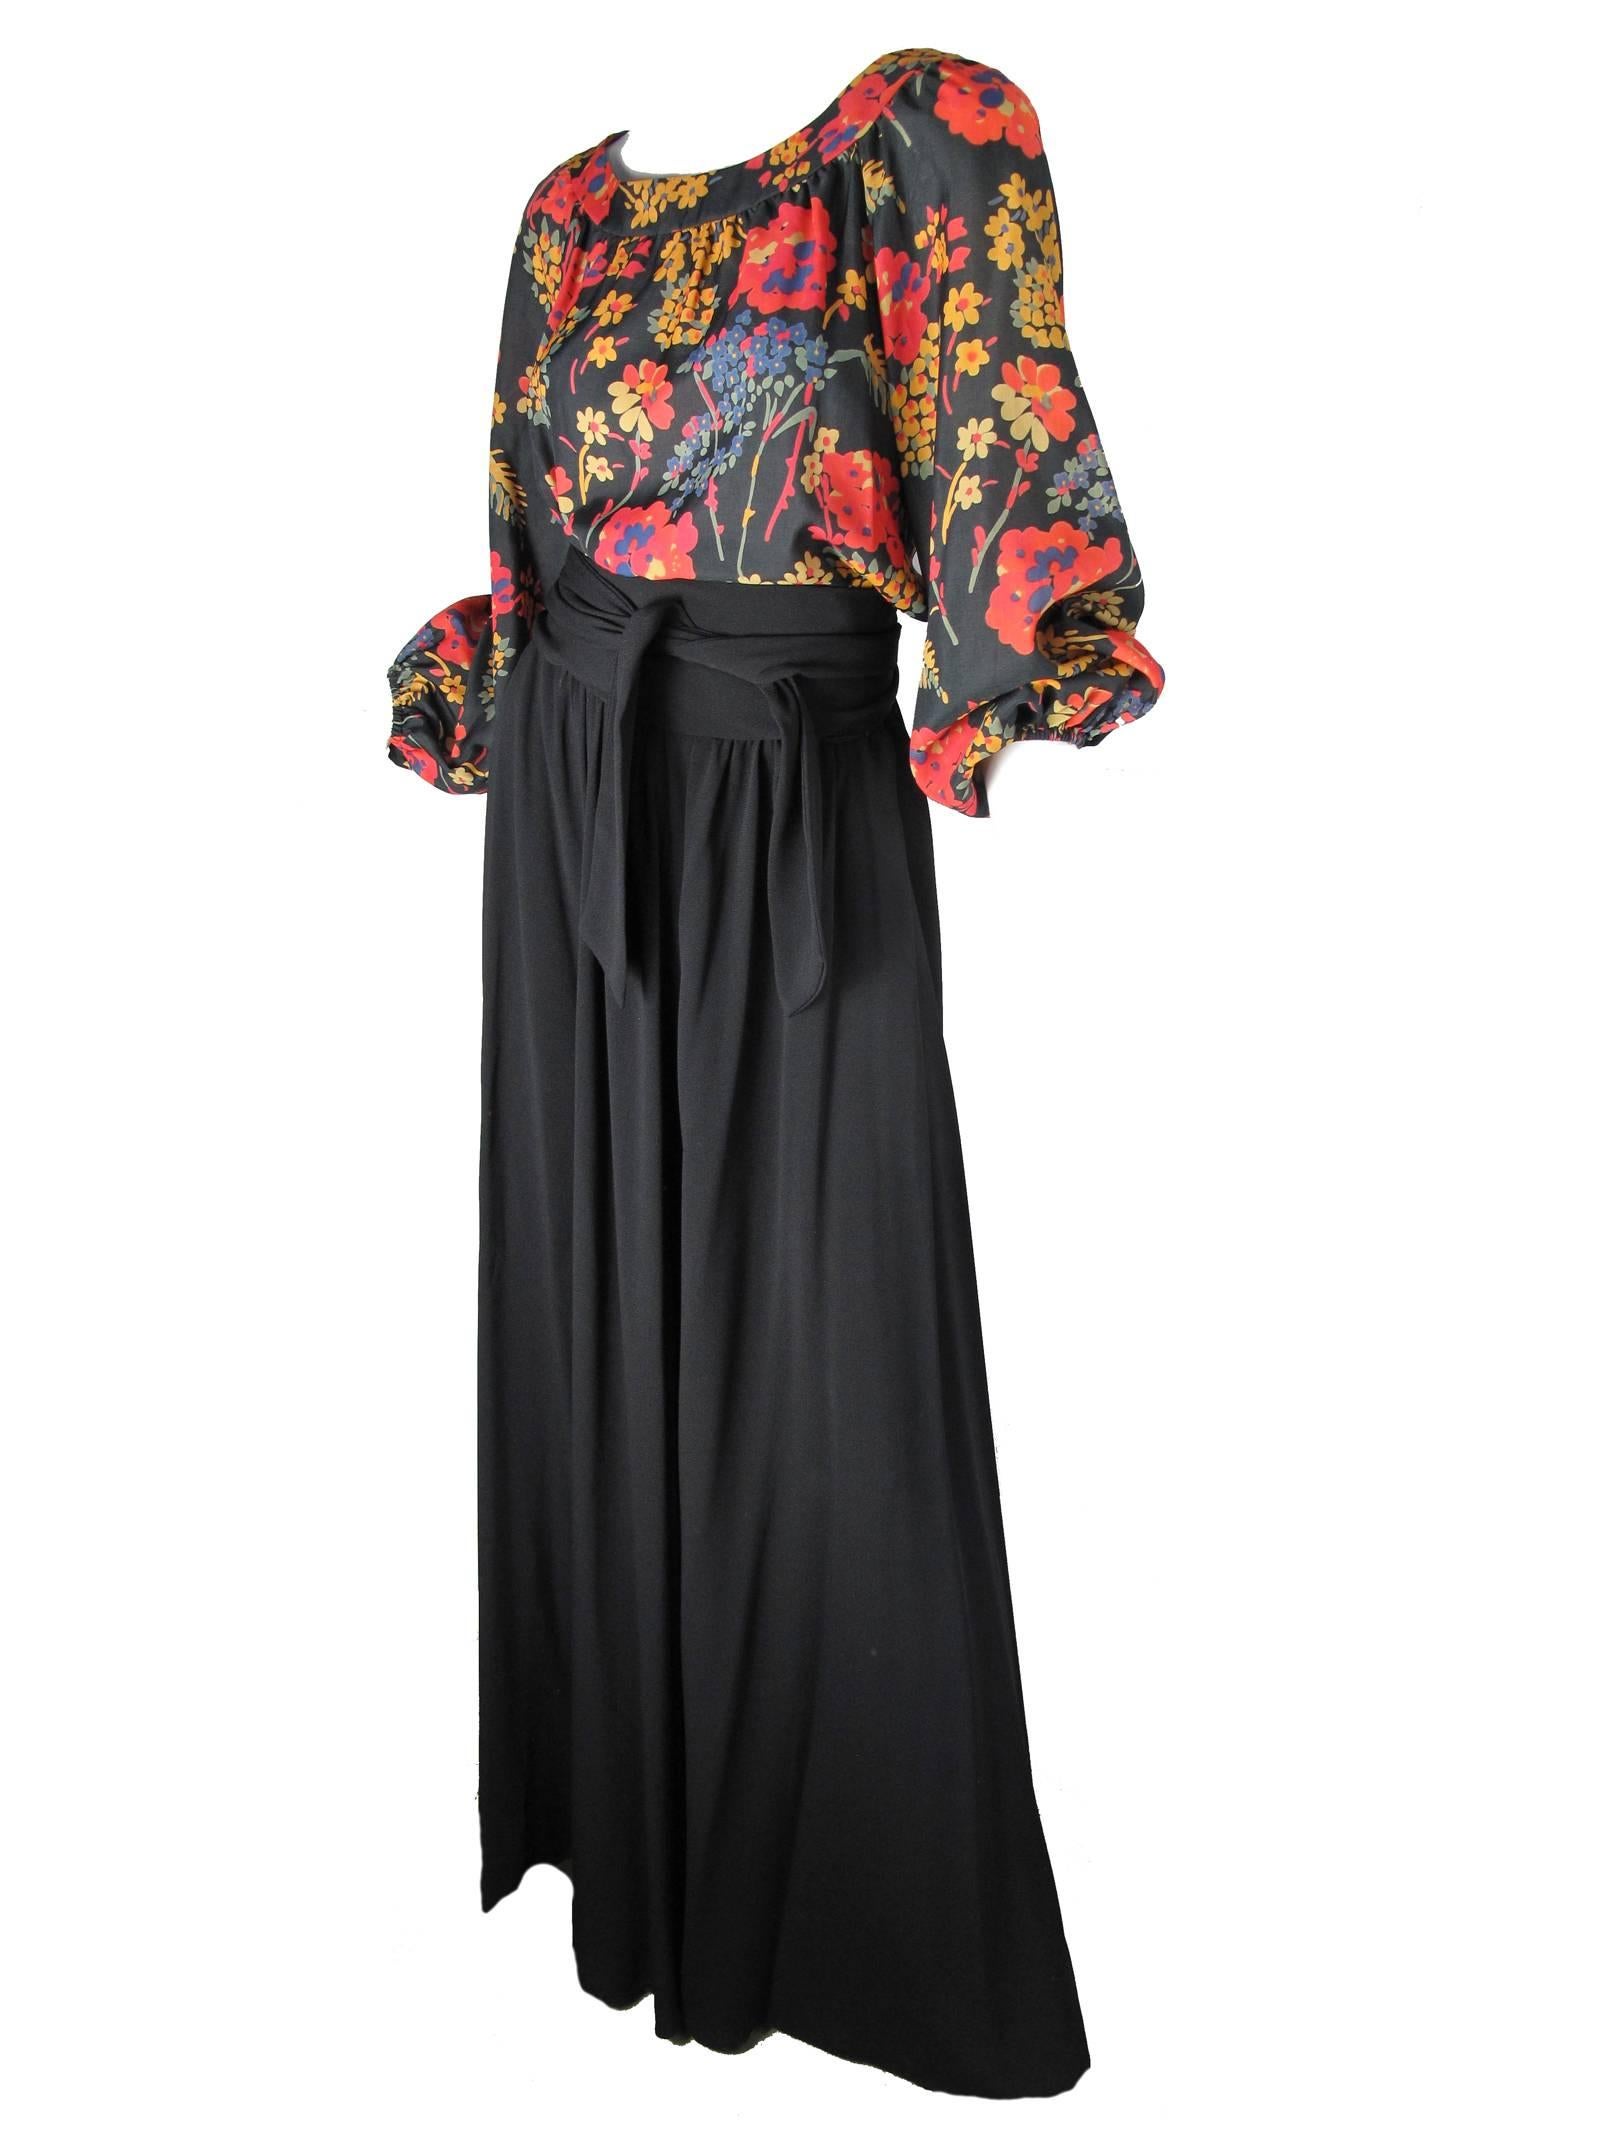 Oscar de la Renta long black crepe evening skirt, cumberbund self belt with side pockets.  Floral silk peasant blouse with scoop neck and snaps up back.   Condition: Excellent.  Size 6 
Measurements taken flat and doubled:
top: 38